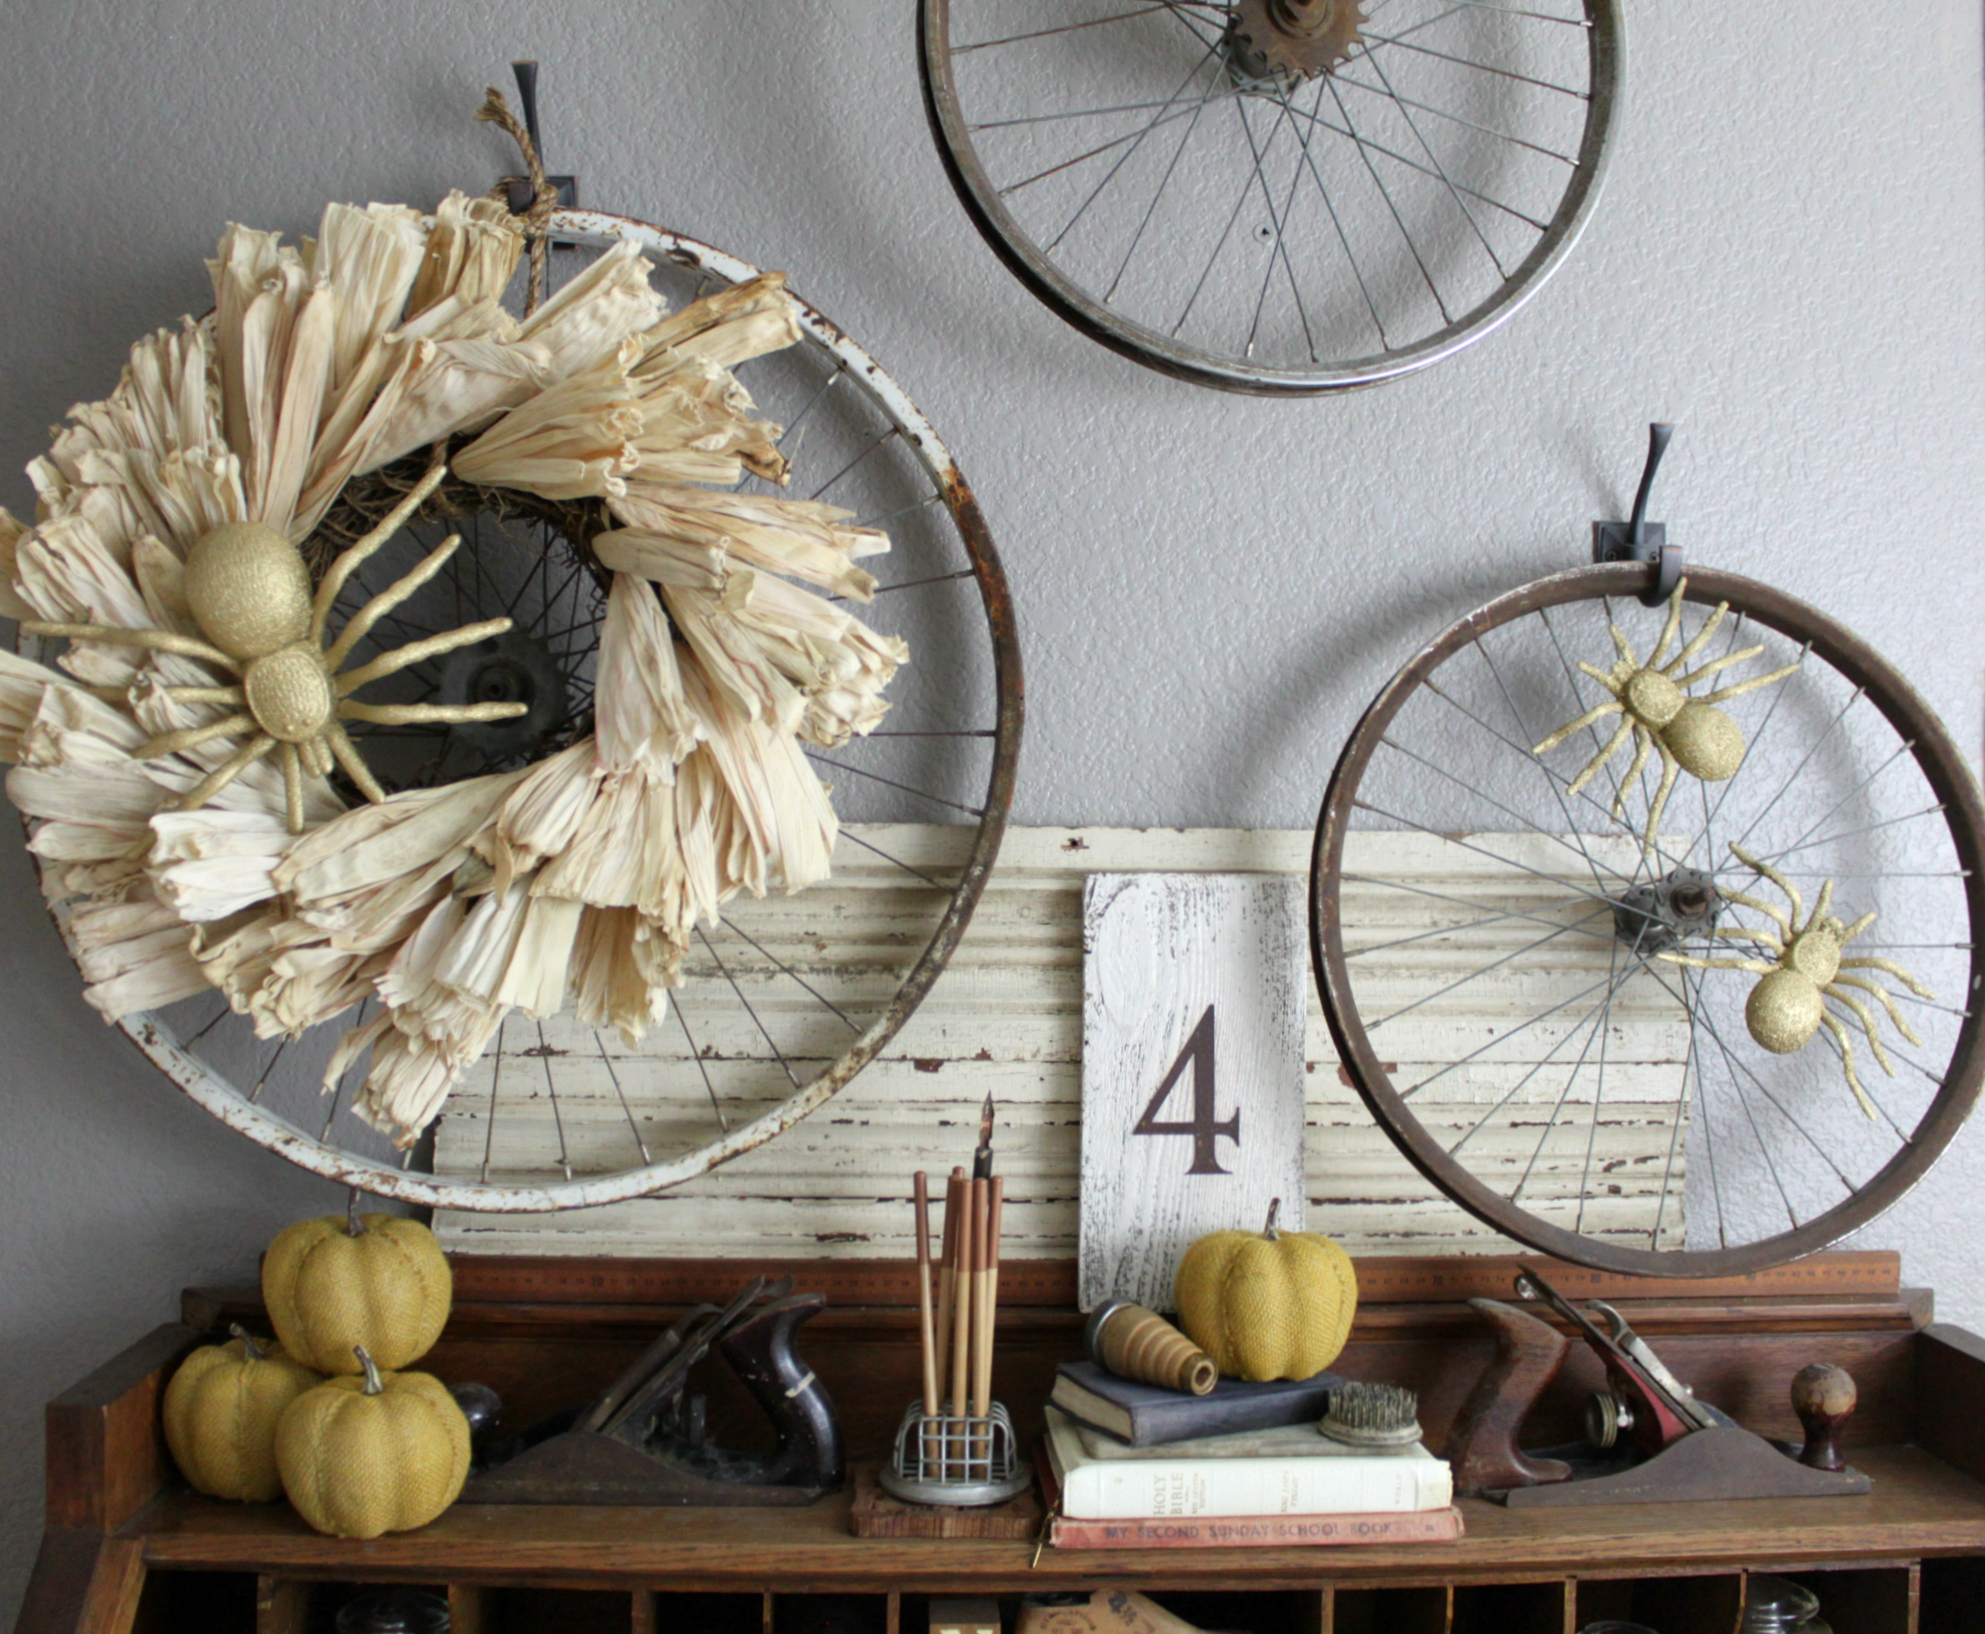 Last Minute Halloween Decor on a Budget by An Inspired Nest